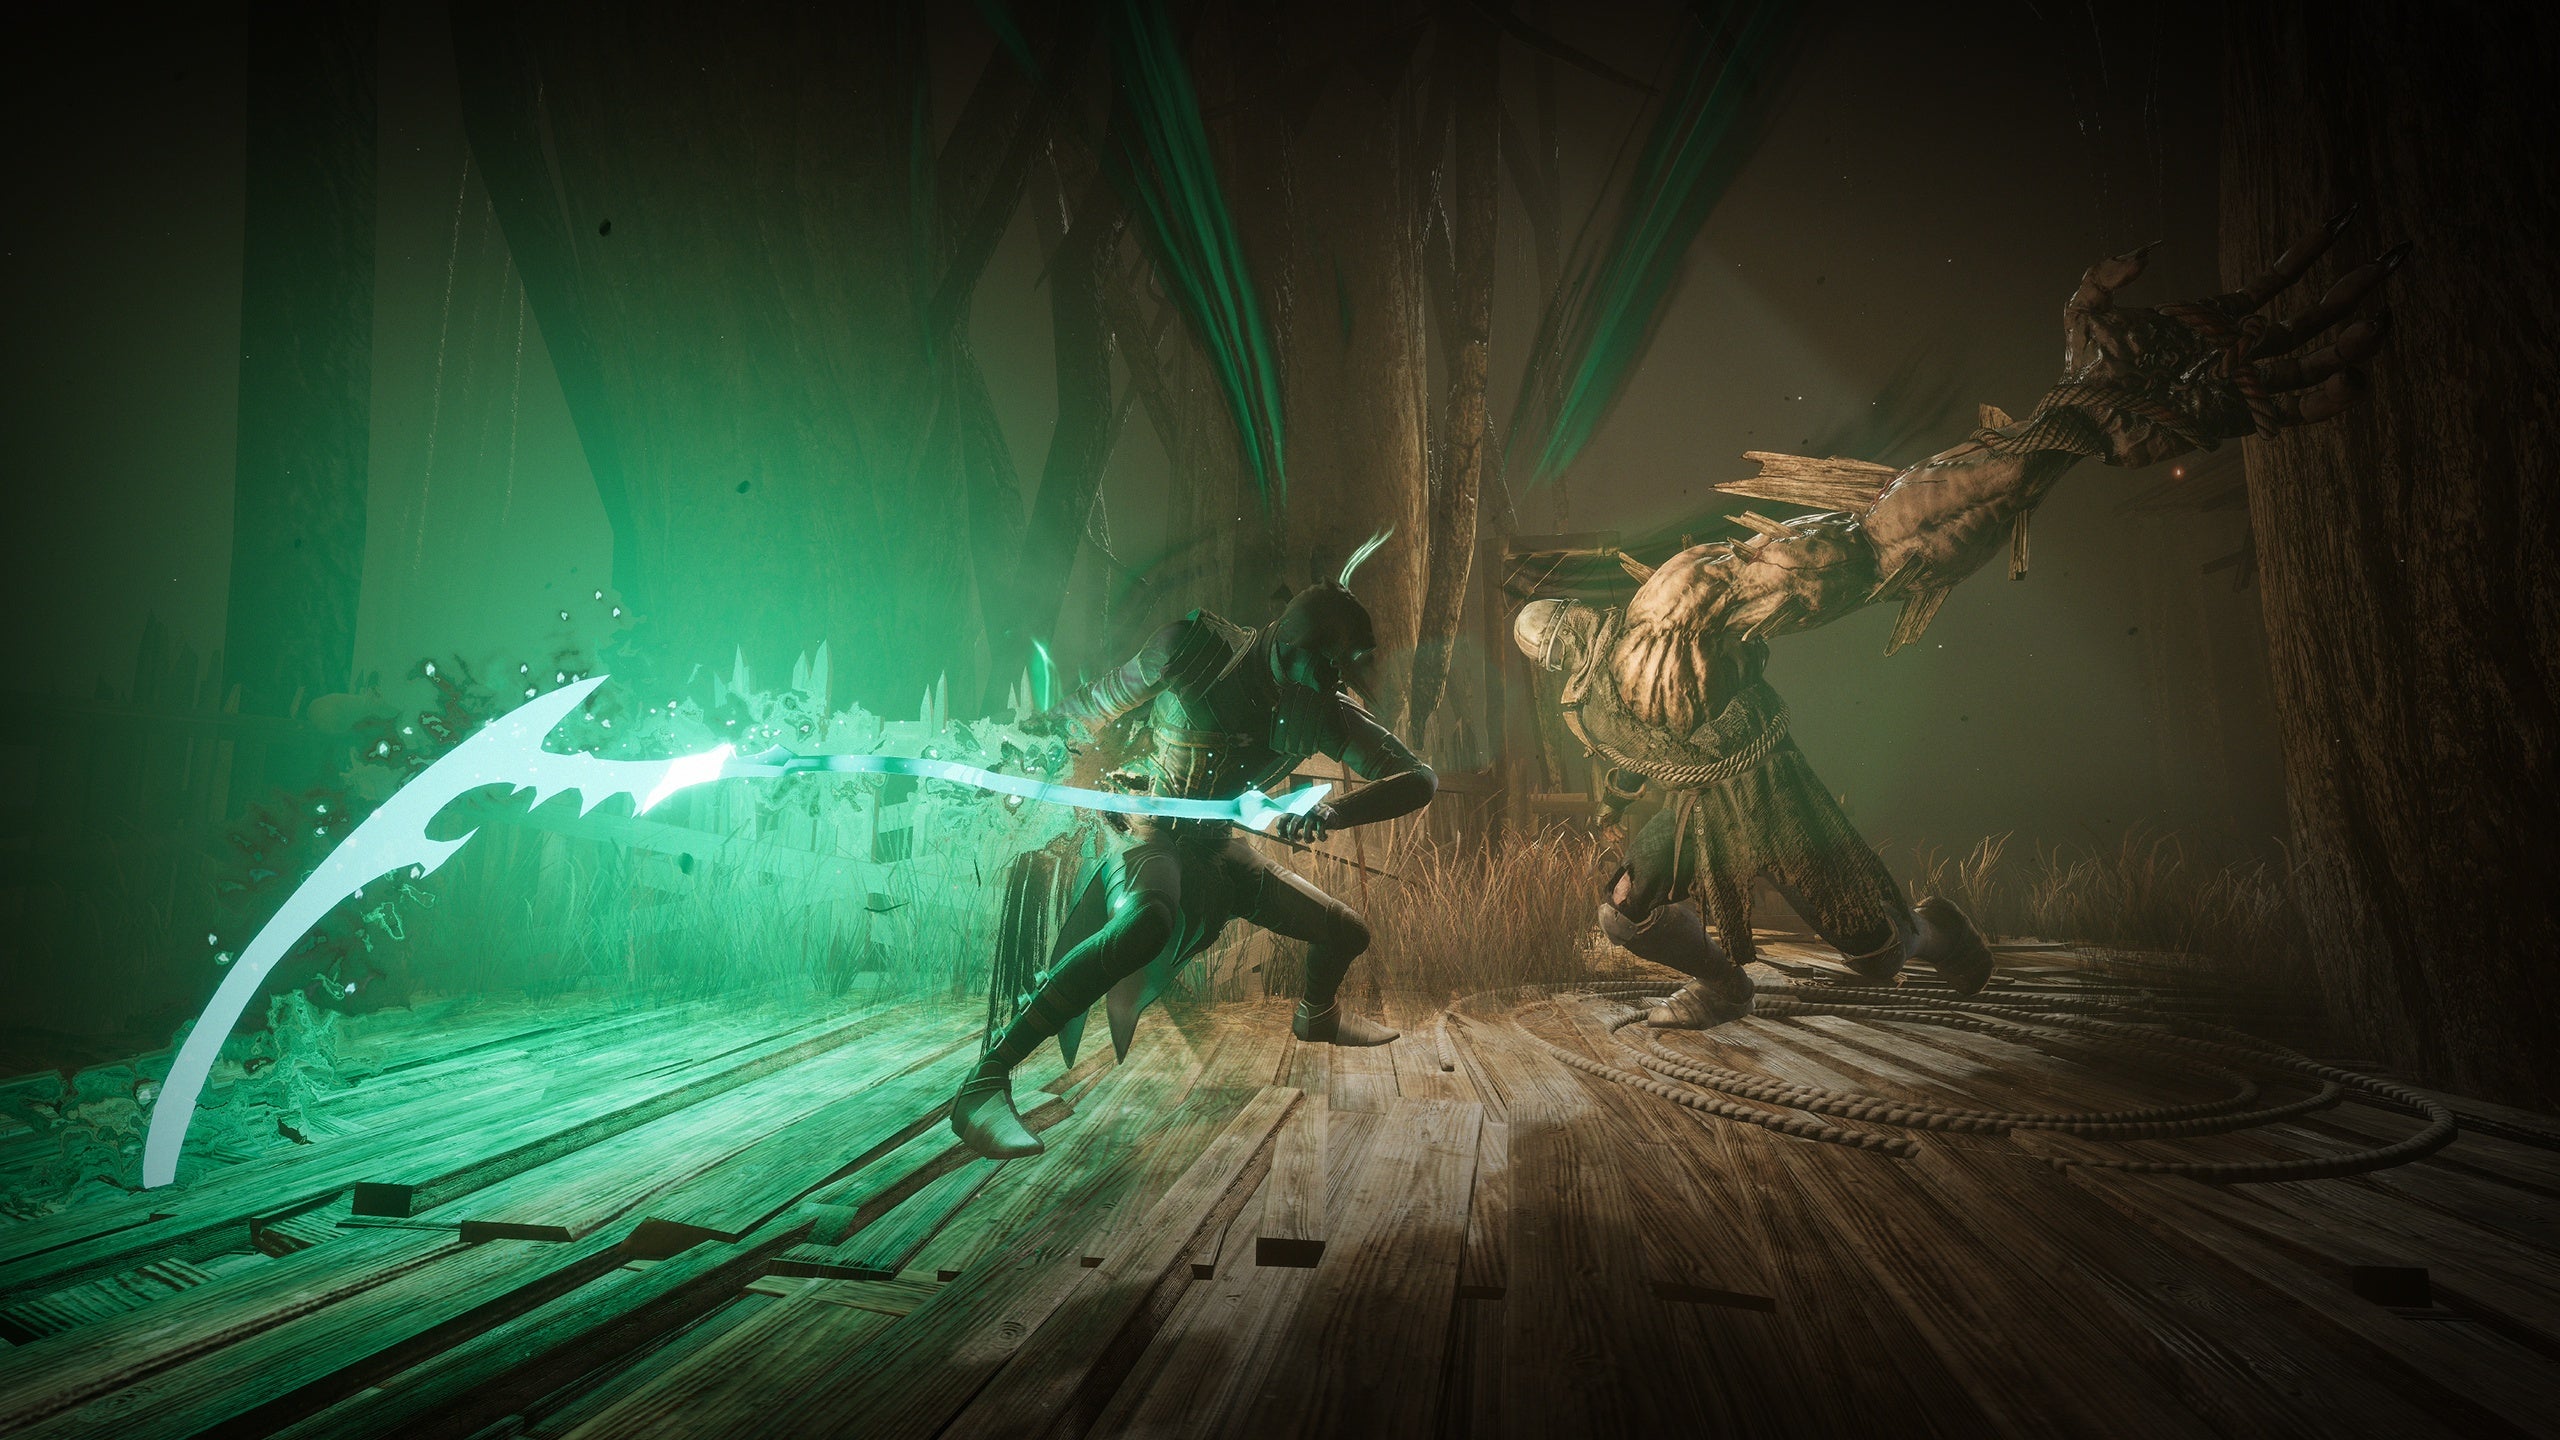 Thymesia is a dark action RPG with energetic melee combat